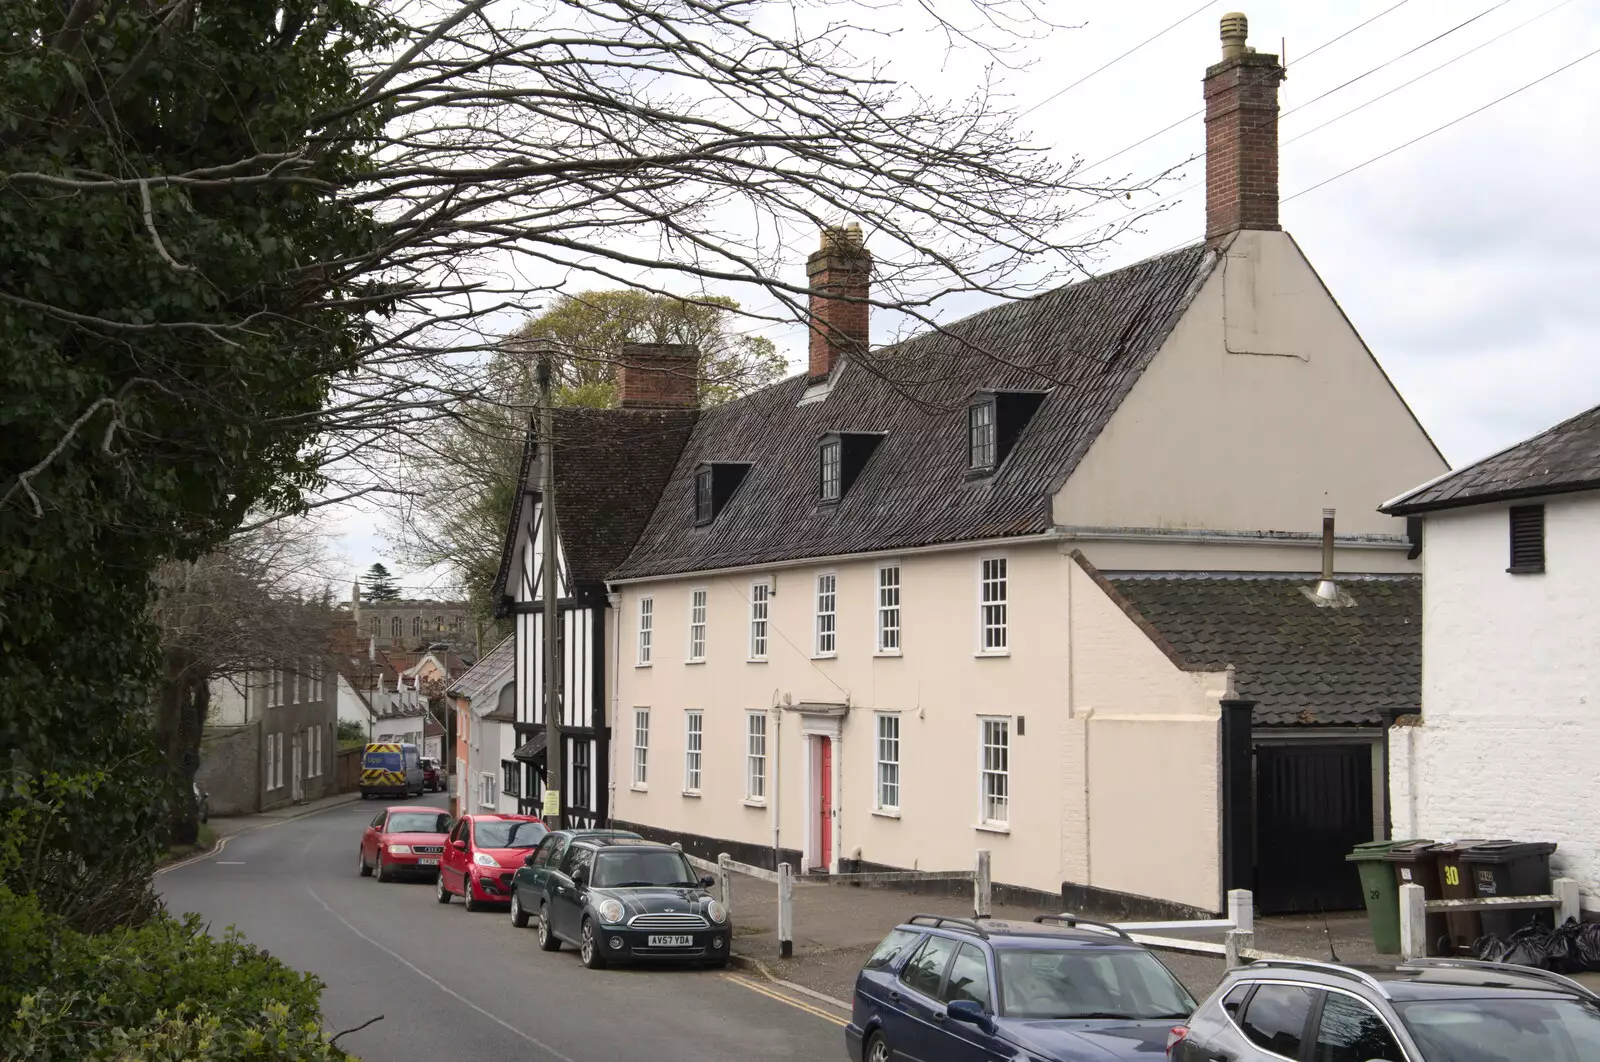 Grand house on Mount Street, from The Lost Pubs of Diss, Norfolk - 26th April 2023